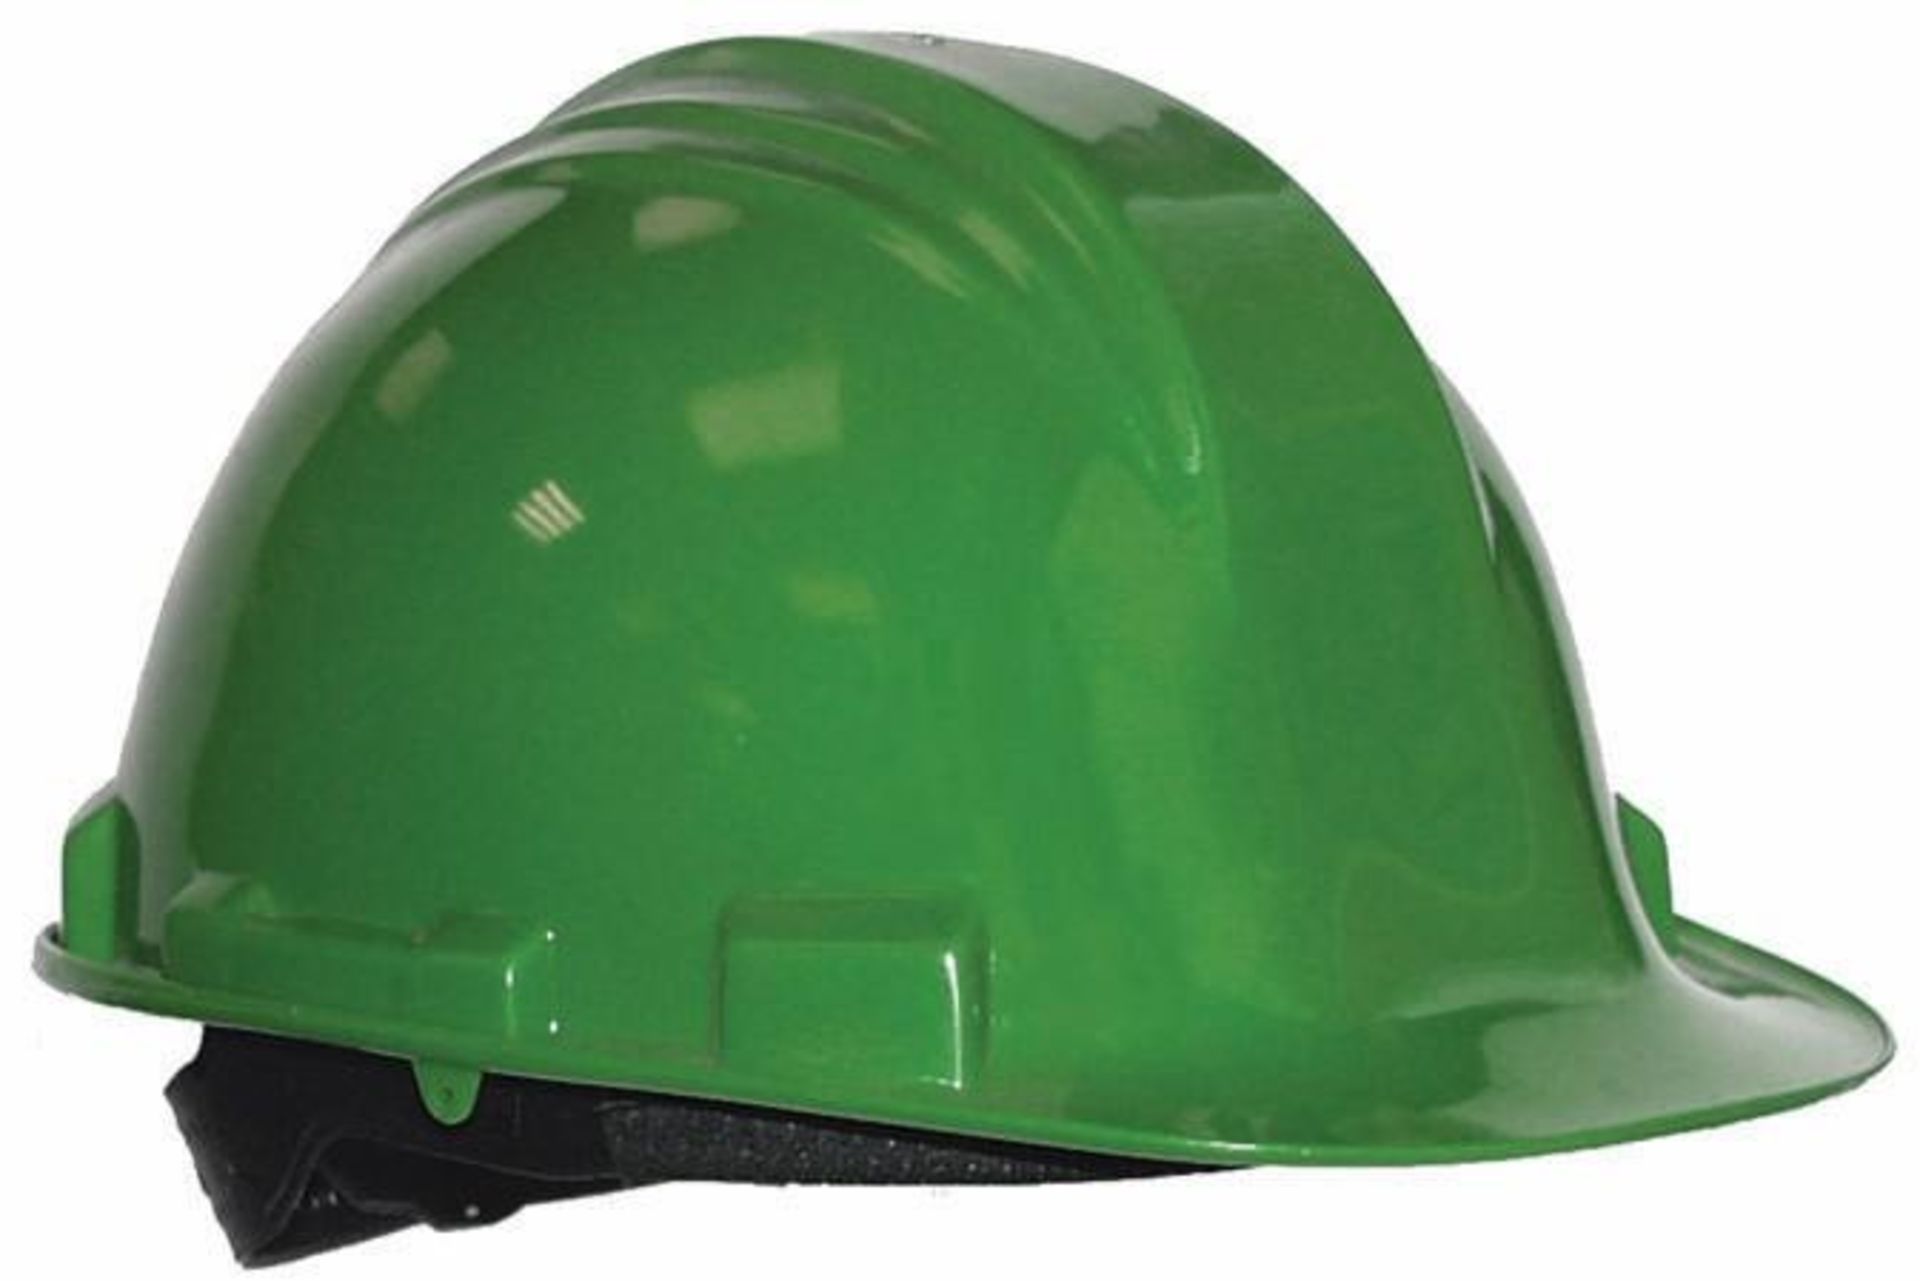 5 x North A59 Safety Helmet Green - CL185 - Ref: NO/A59/GRN/P27 - New Stock - Location: Stoke-on-Tre